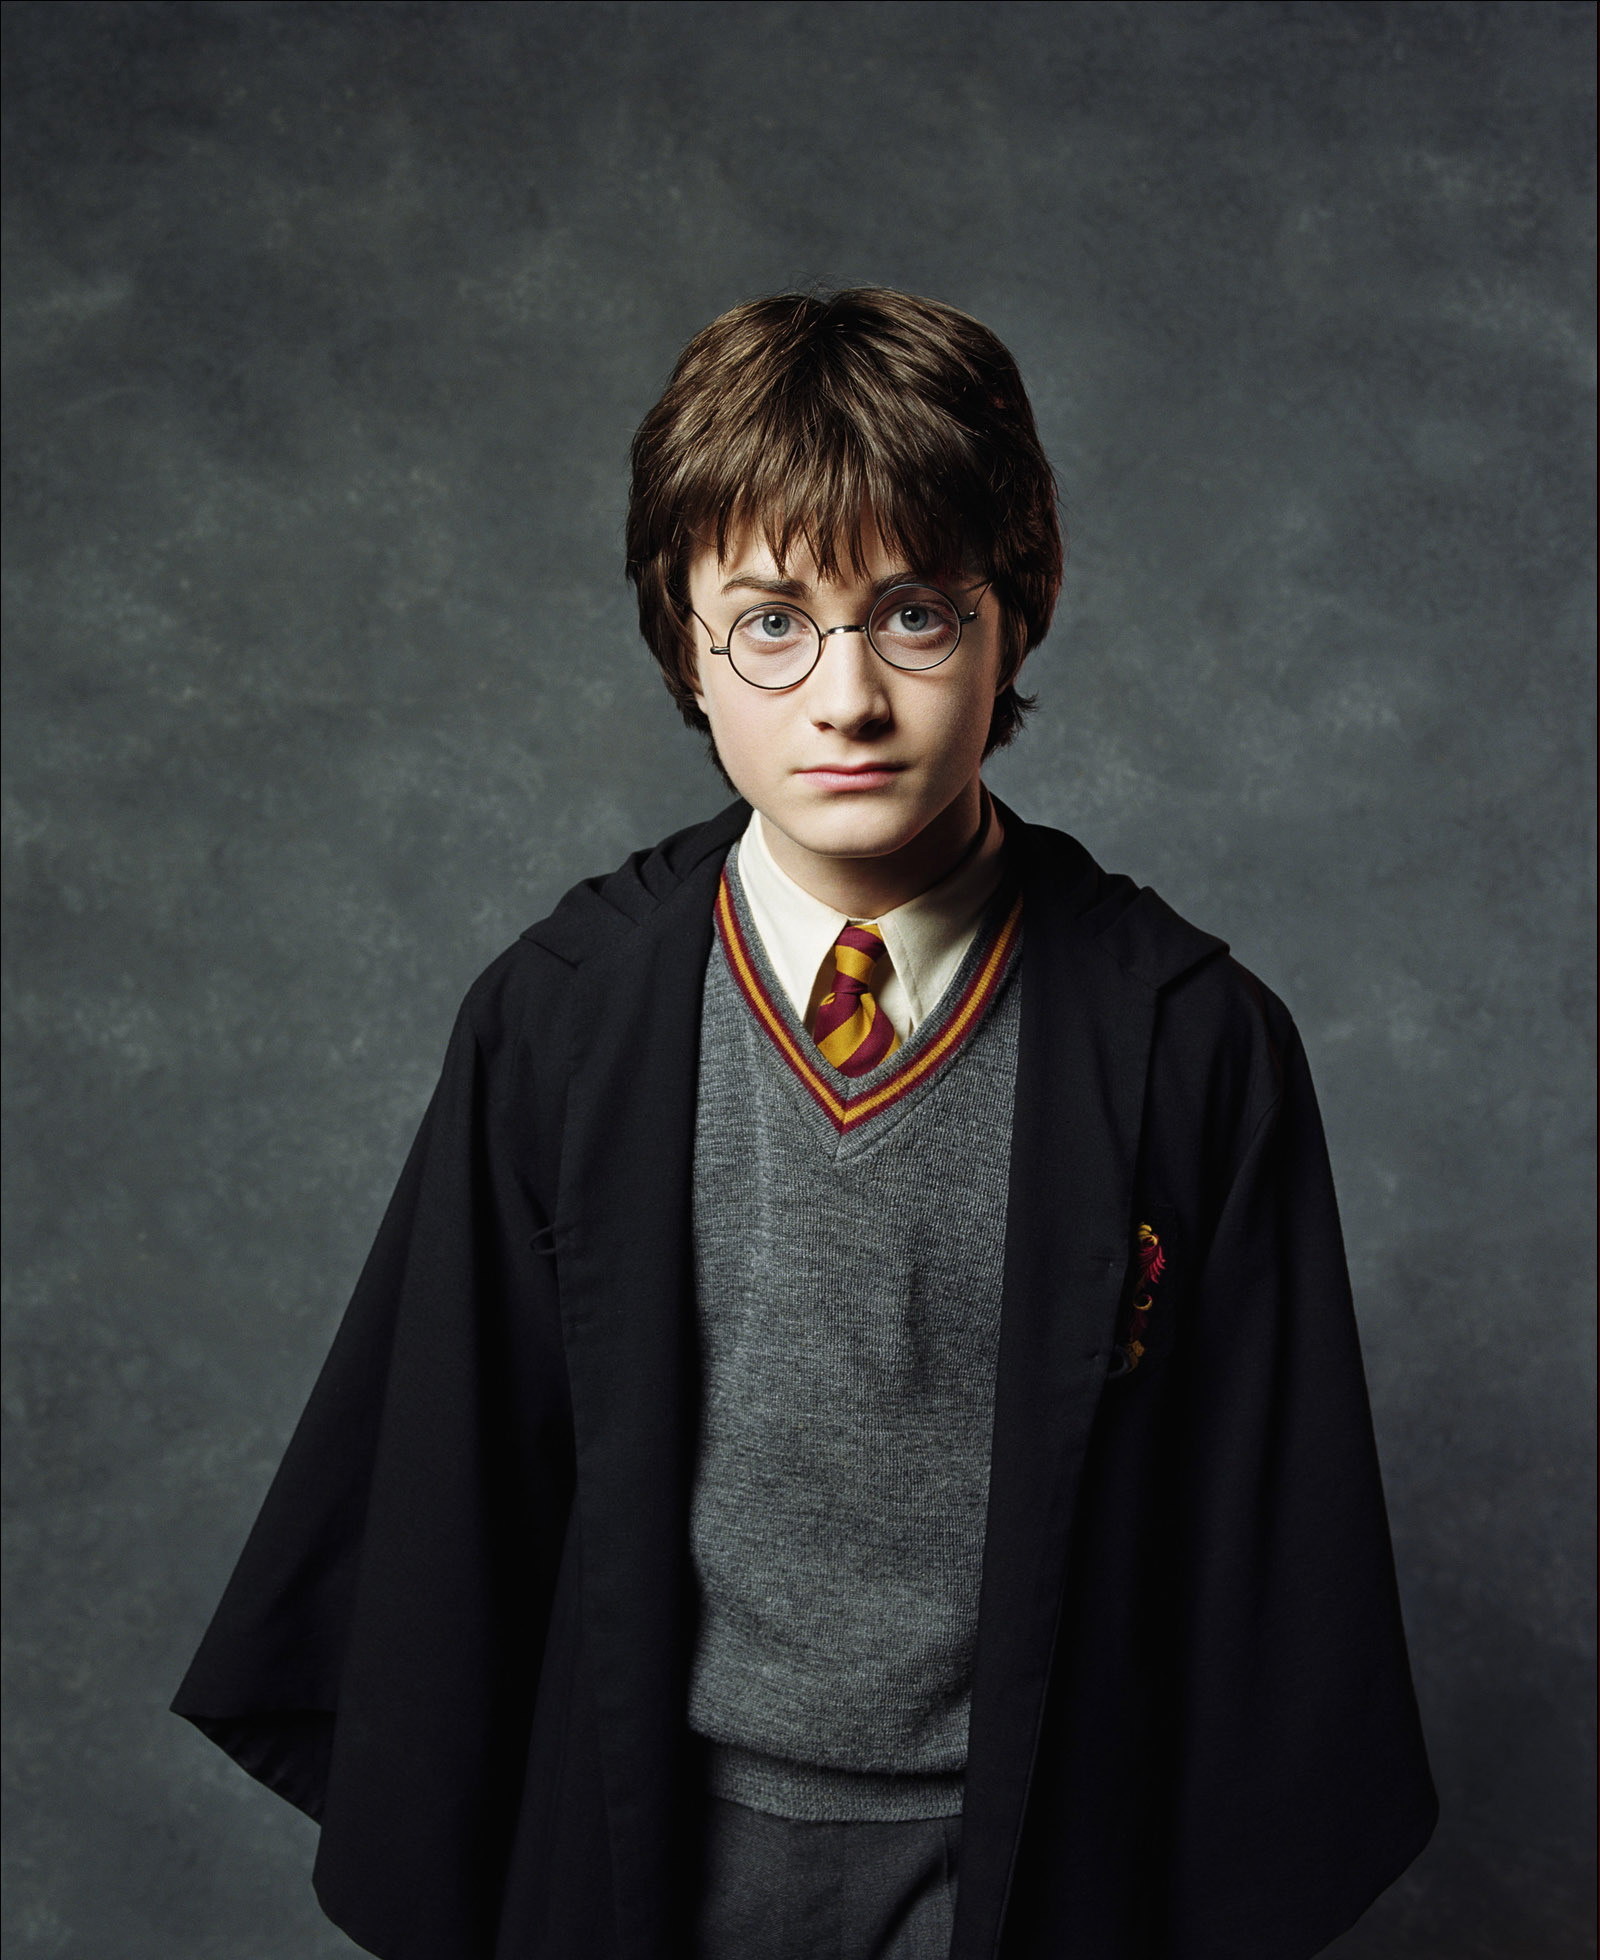 2001-harry-potter-and-the-sorcerer-s-stone-promotional-shoot-hq